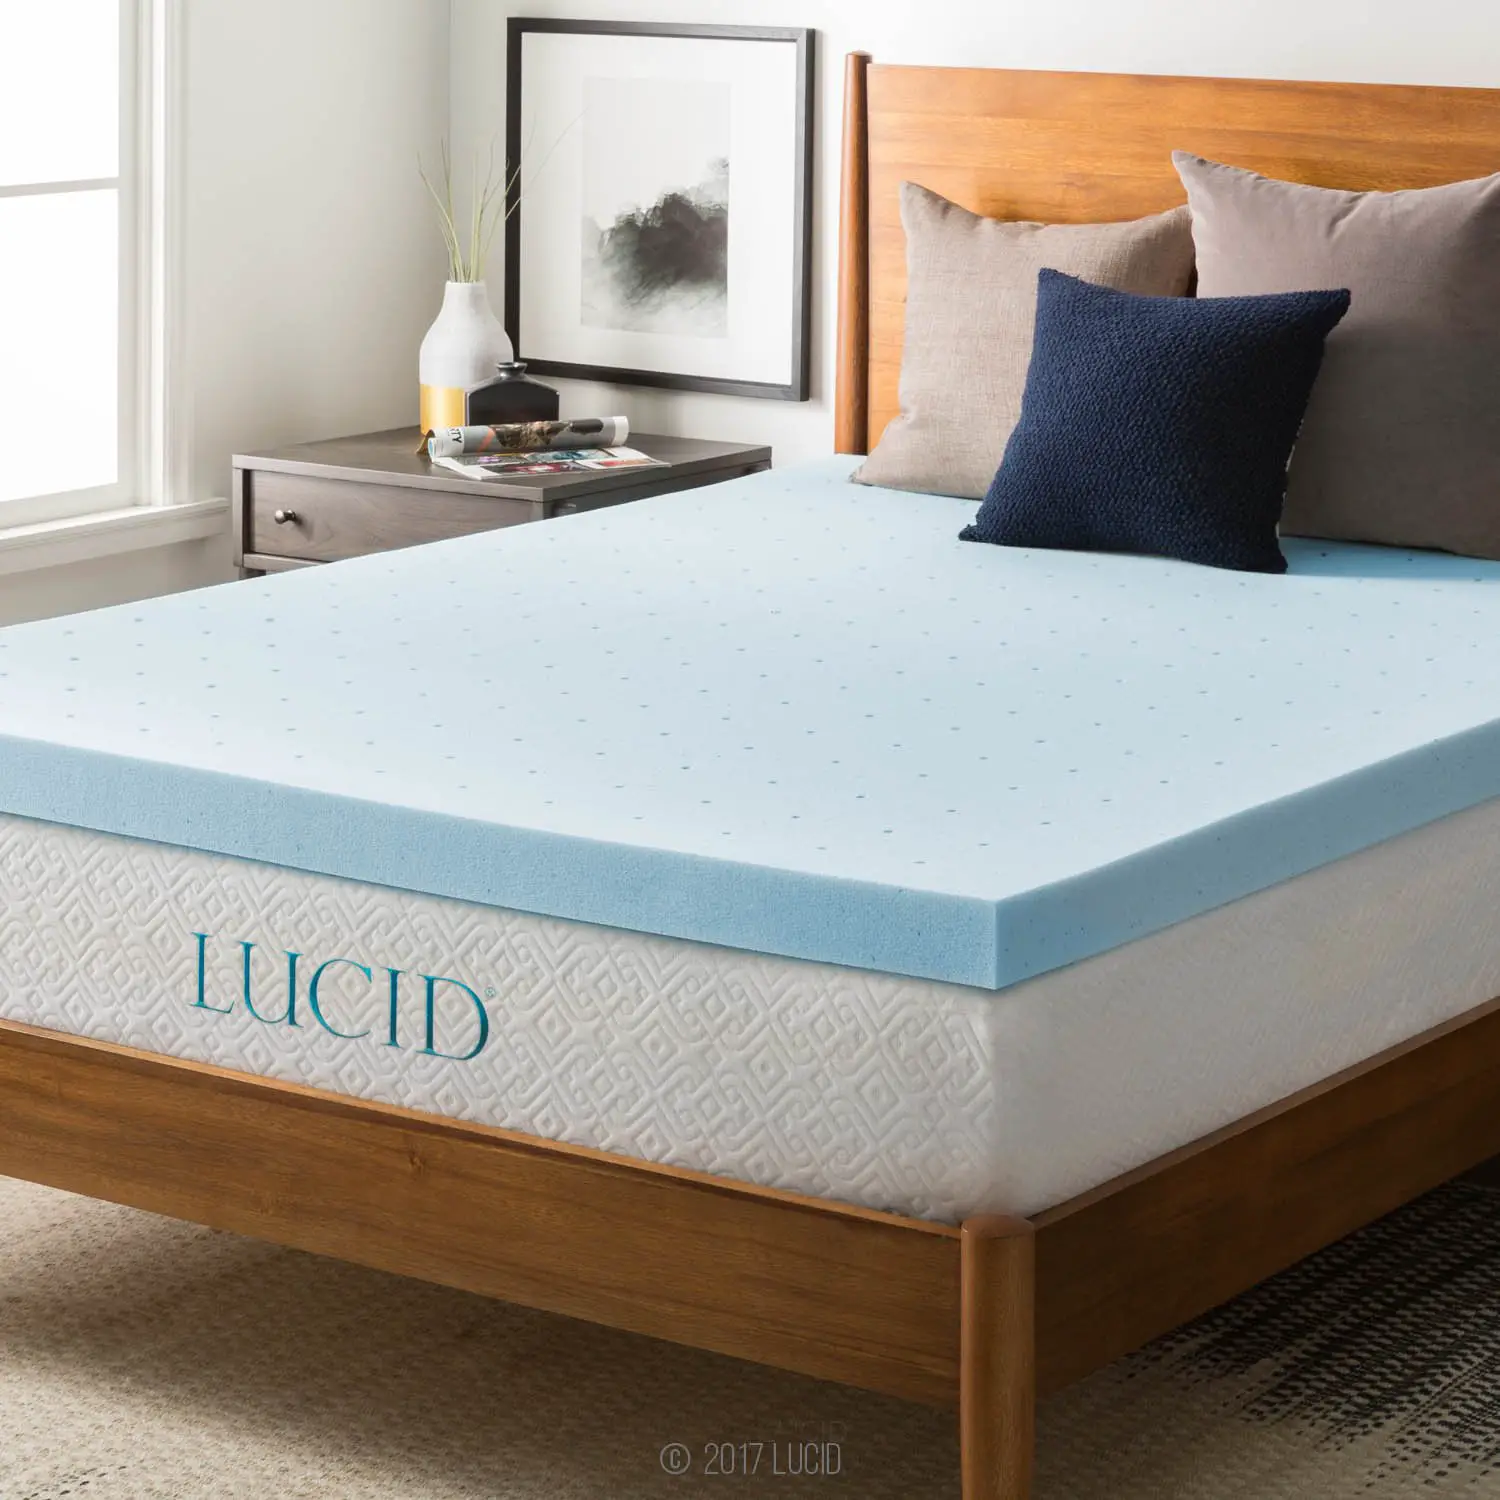 How To Make Your Old Mattress Feel Better Than New Again â The First ...